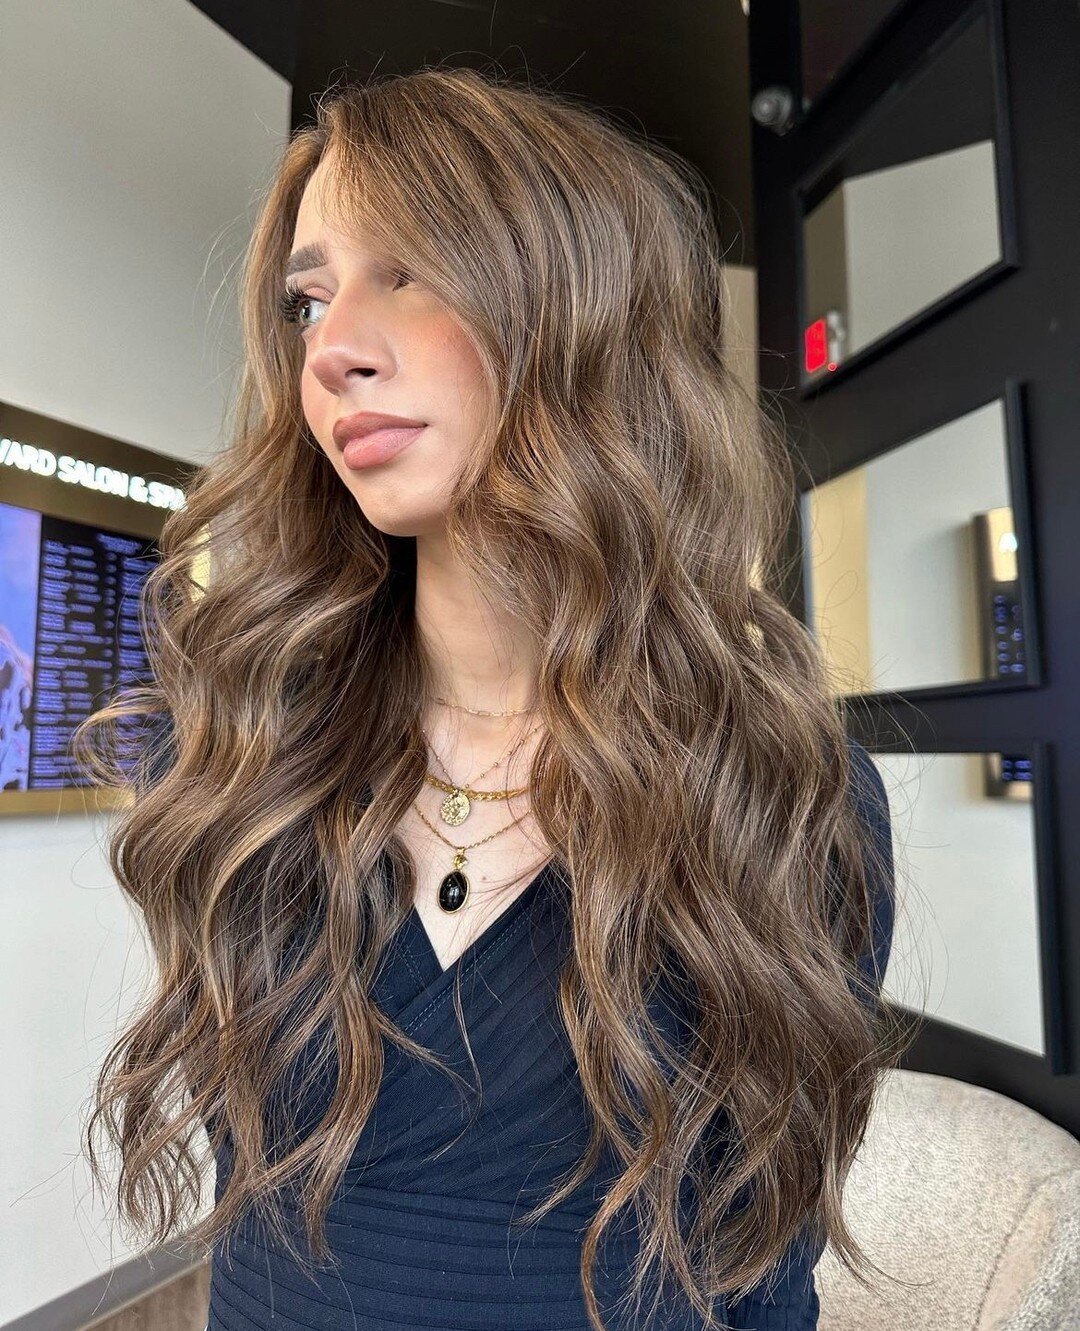 Starting Friday off right with the perfect look! ⁠✨⁠
⁠
stylist: @hannahmarlarhair⁠